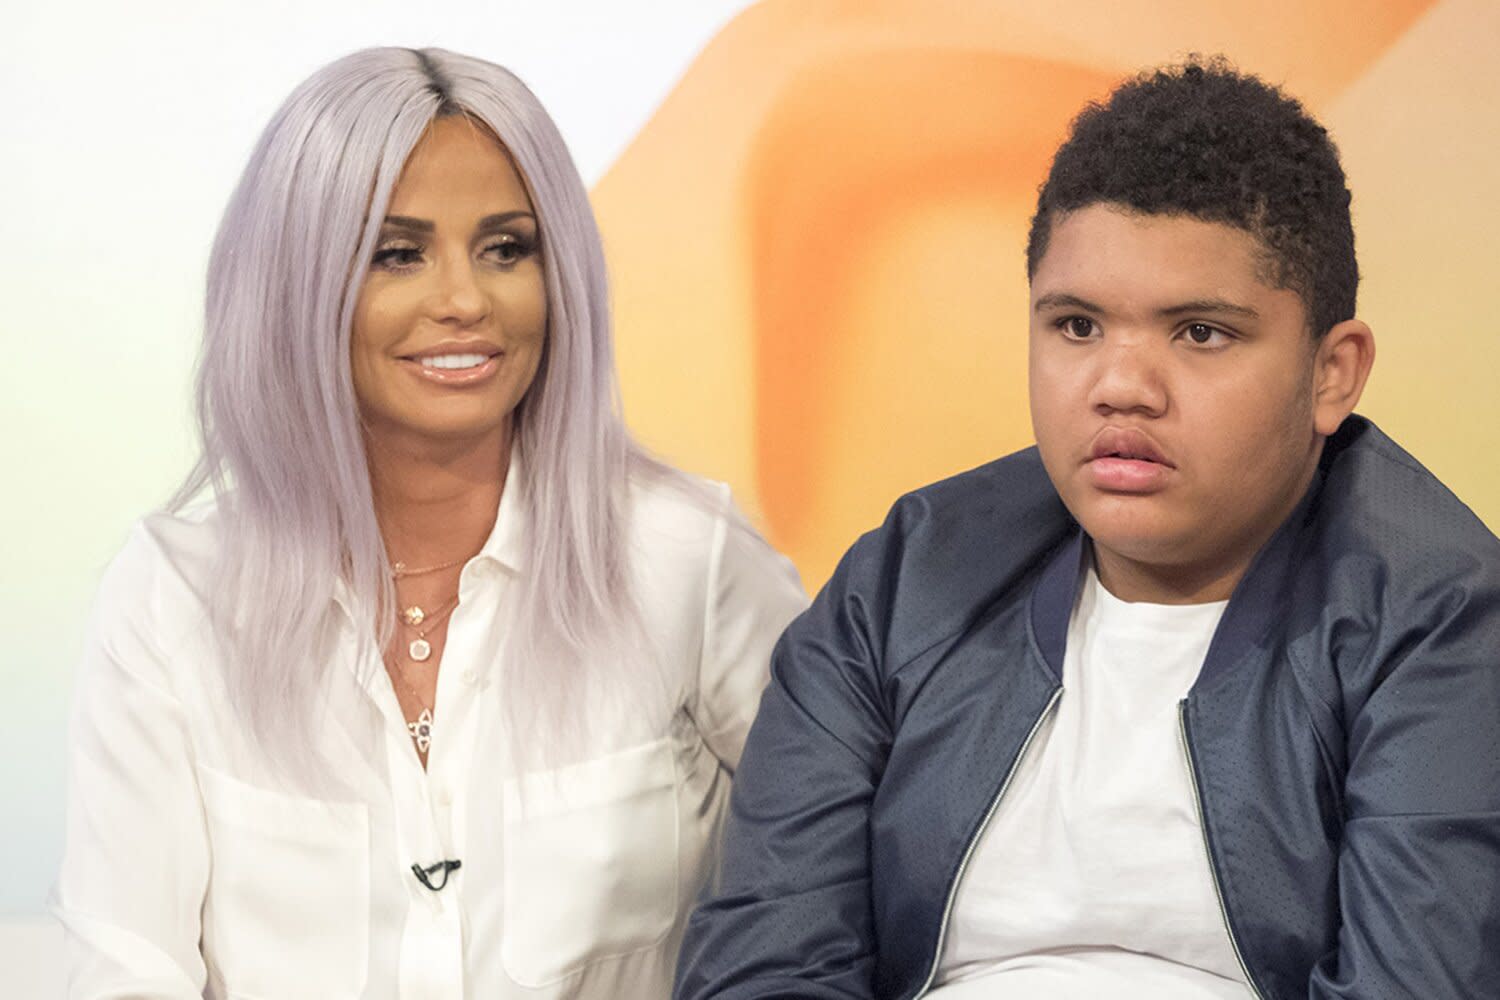 Katie Price says she made the decision to place her 18-year-old son Harvey in a full-time nursing home